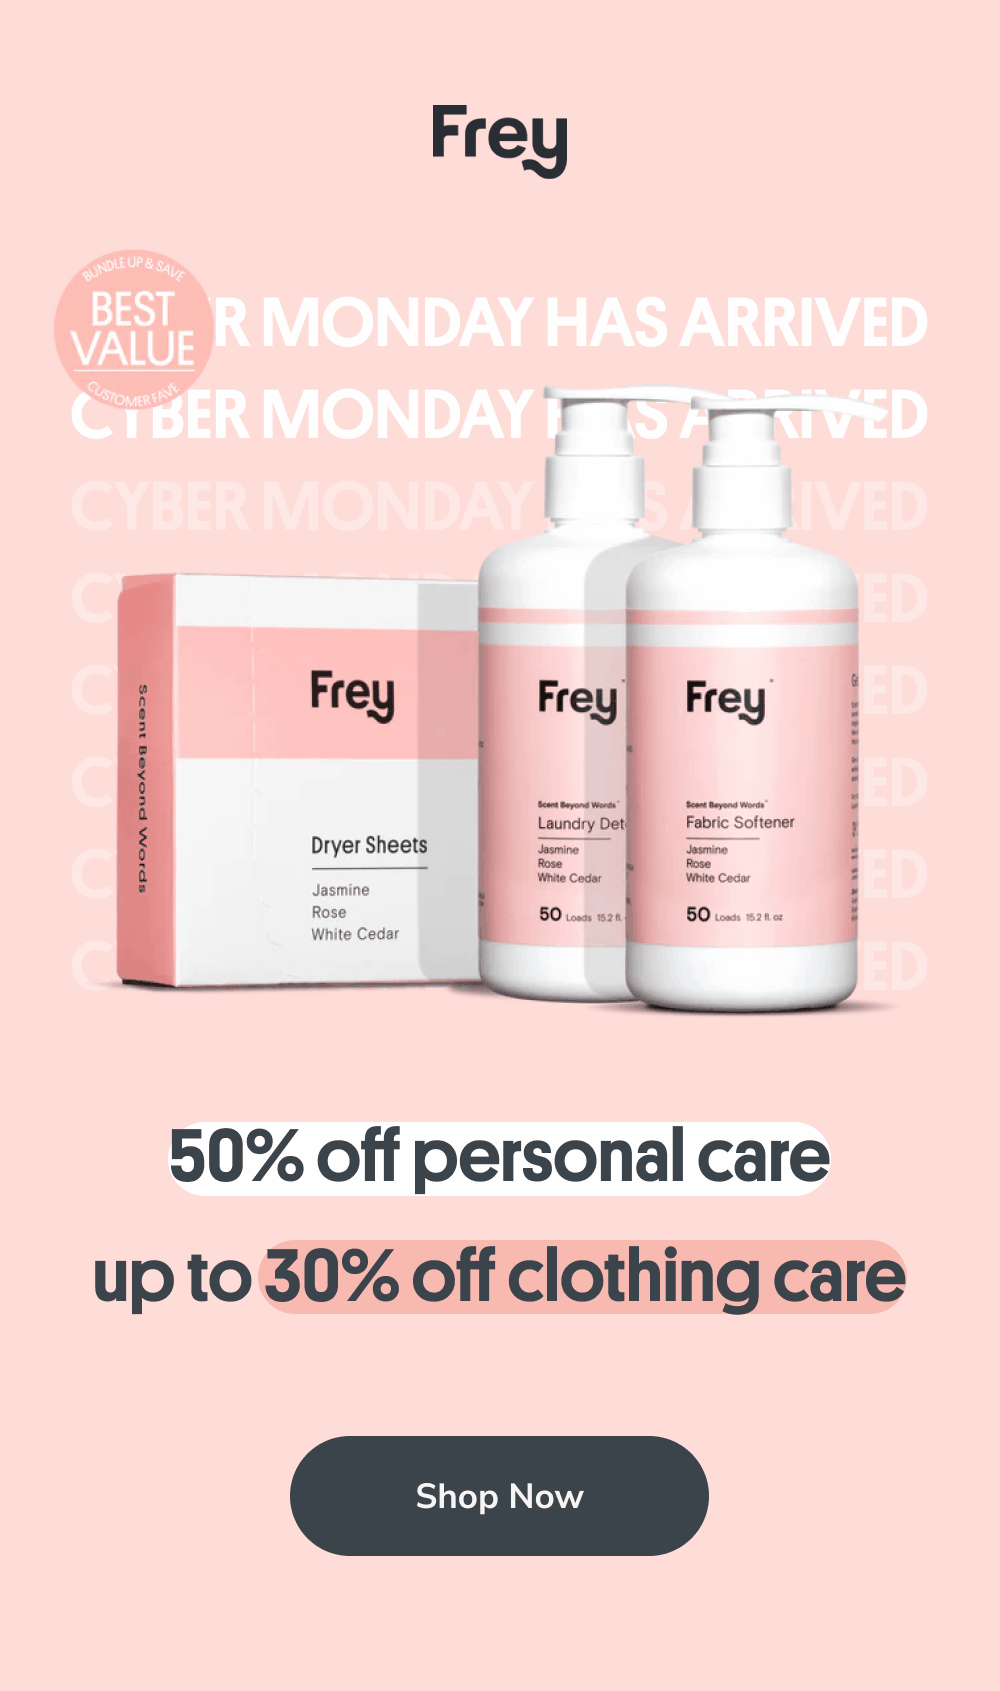 CYBER MONDAY HAS ARRIVED  [SHOP THE SALE]